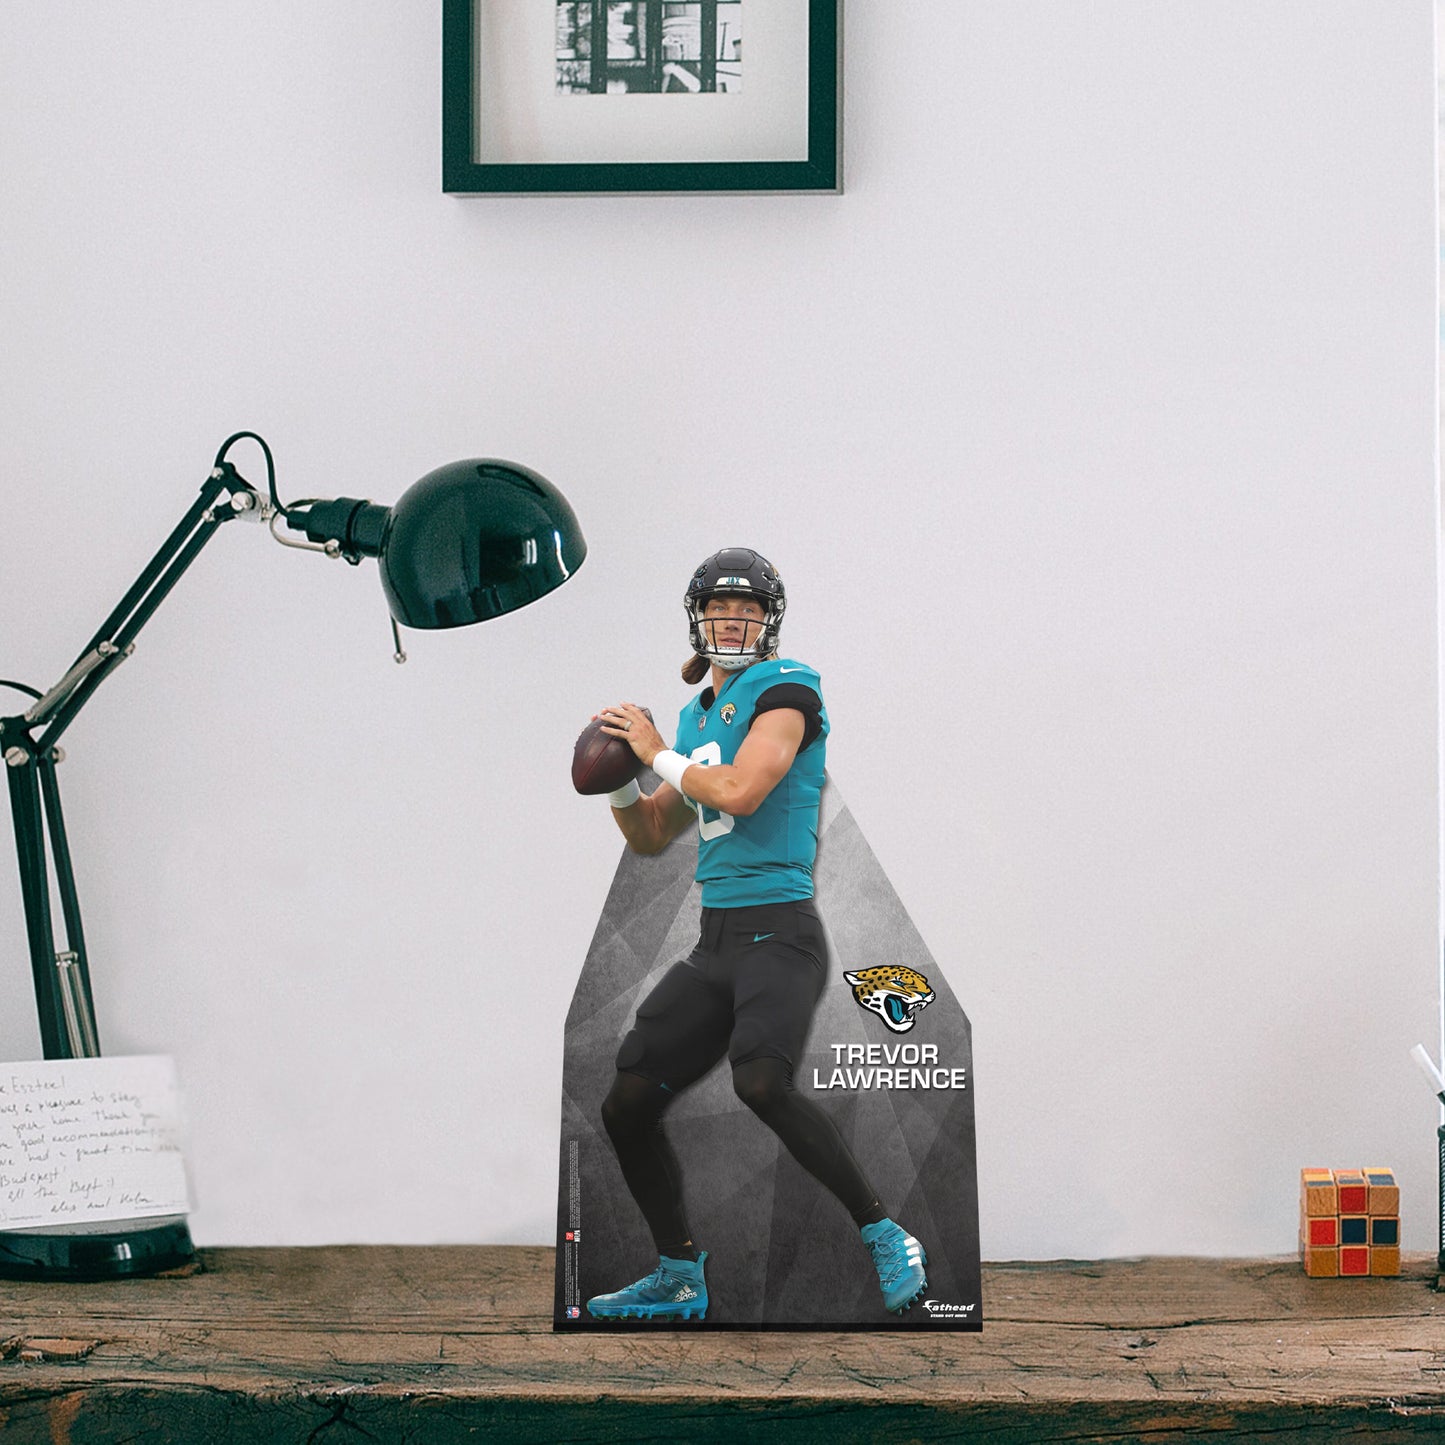 Jacksonville Jaguars: Trevor Lawrence 2021  Mini   Cardstock Cutout  - Officially Licensed NFL    Stand Out